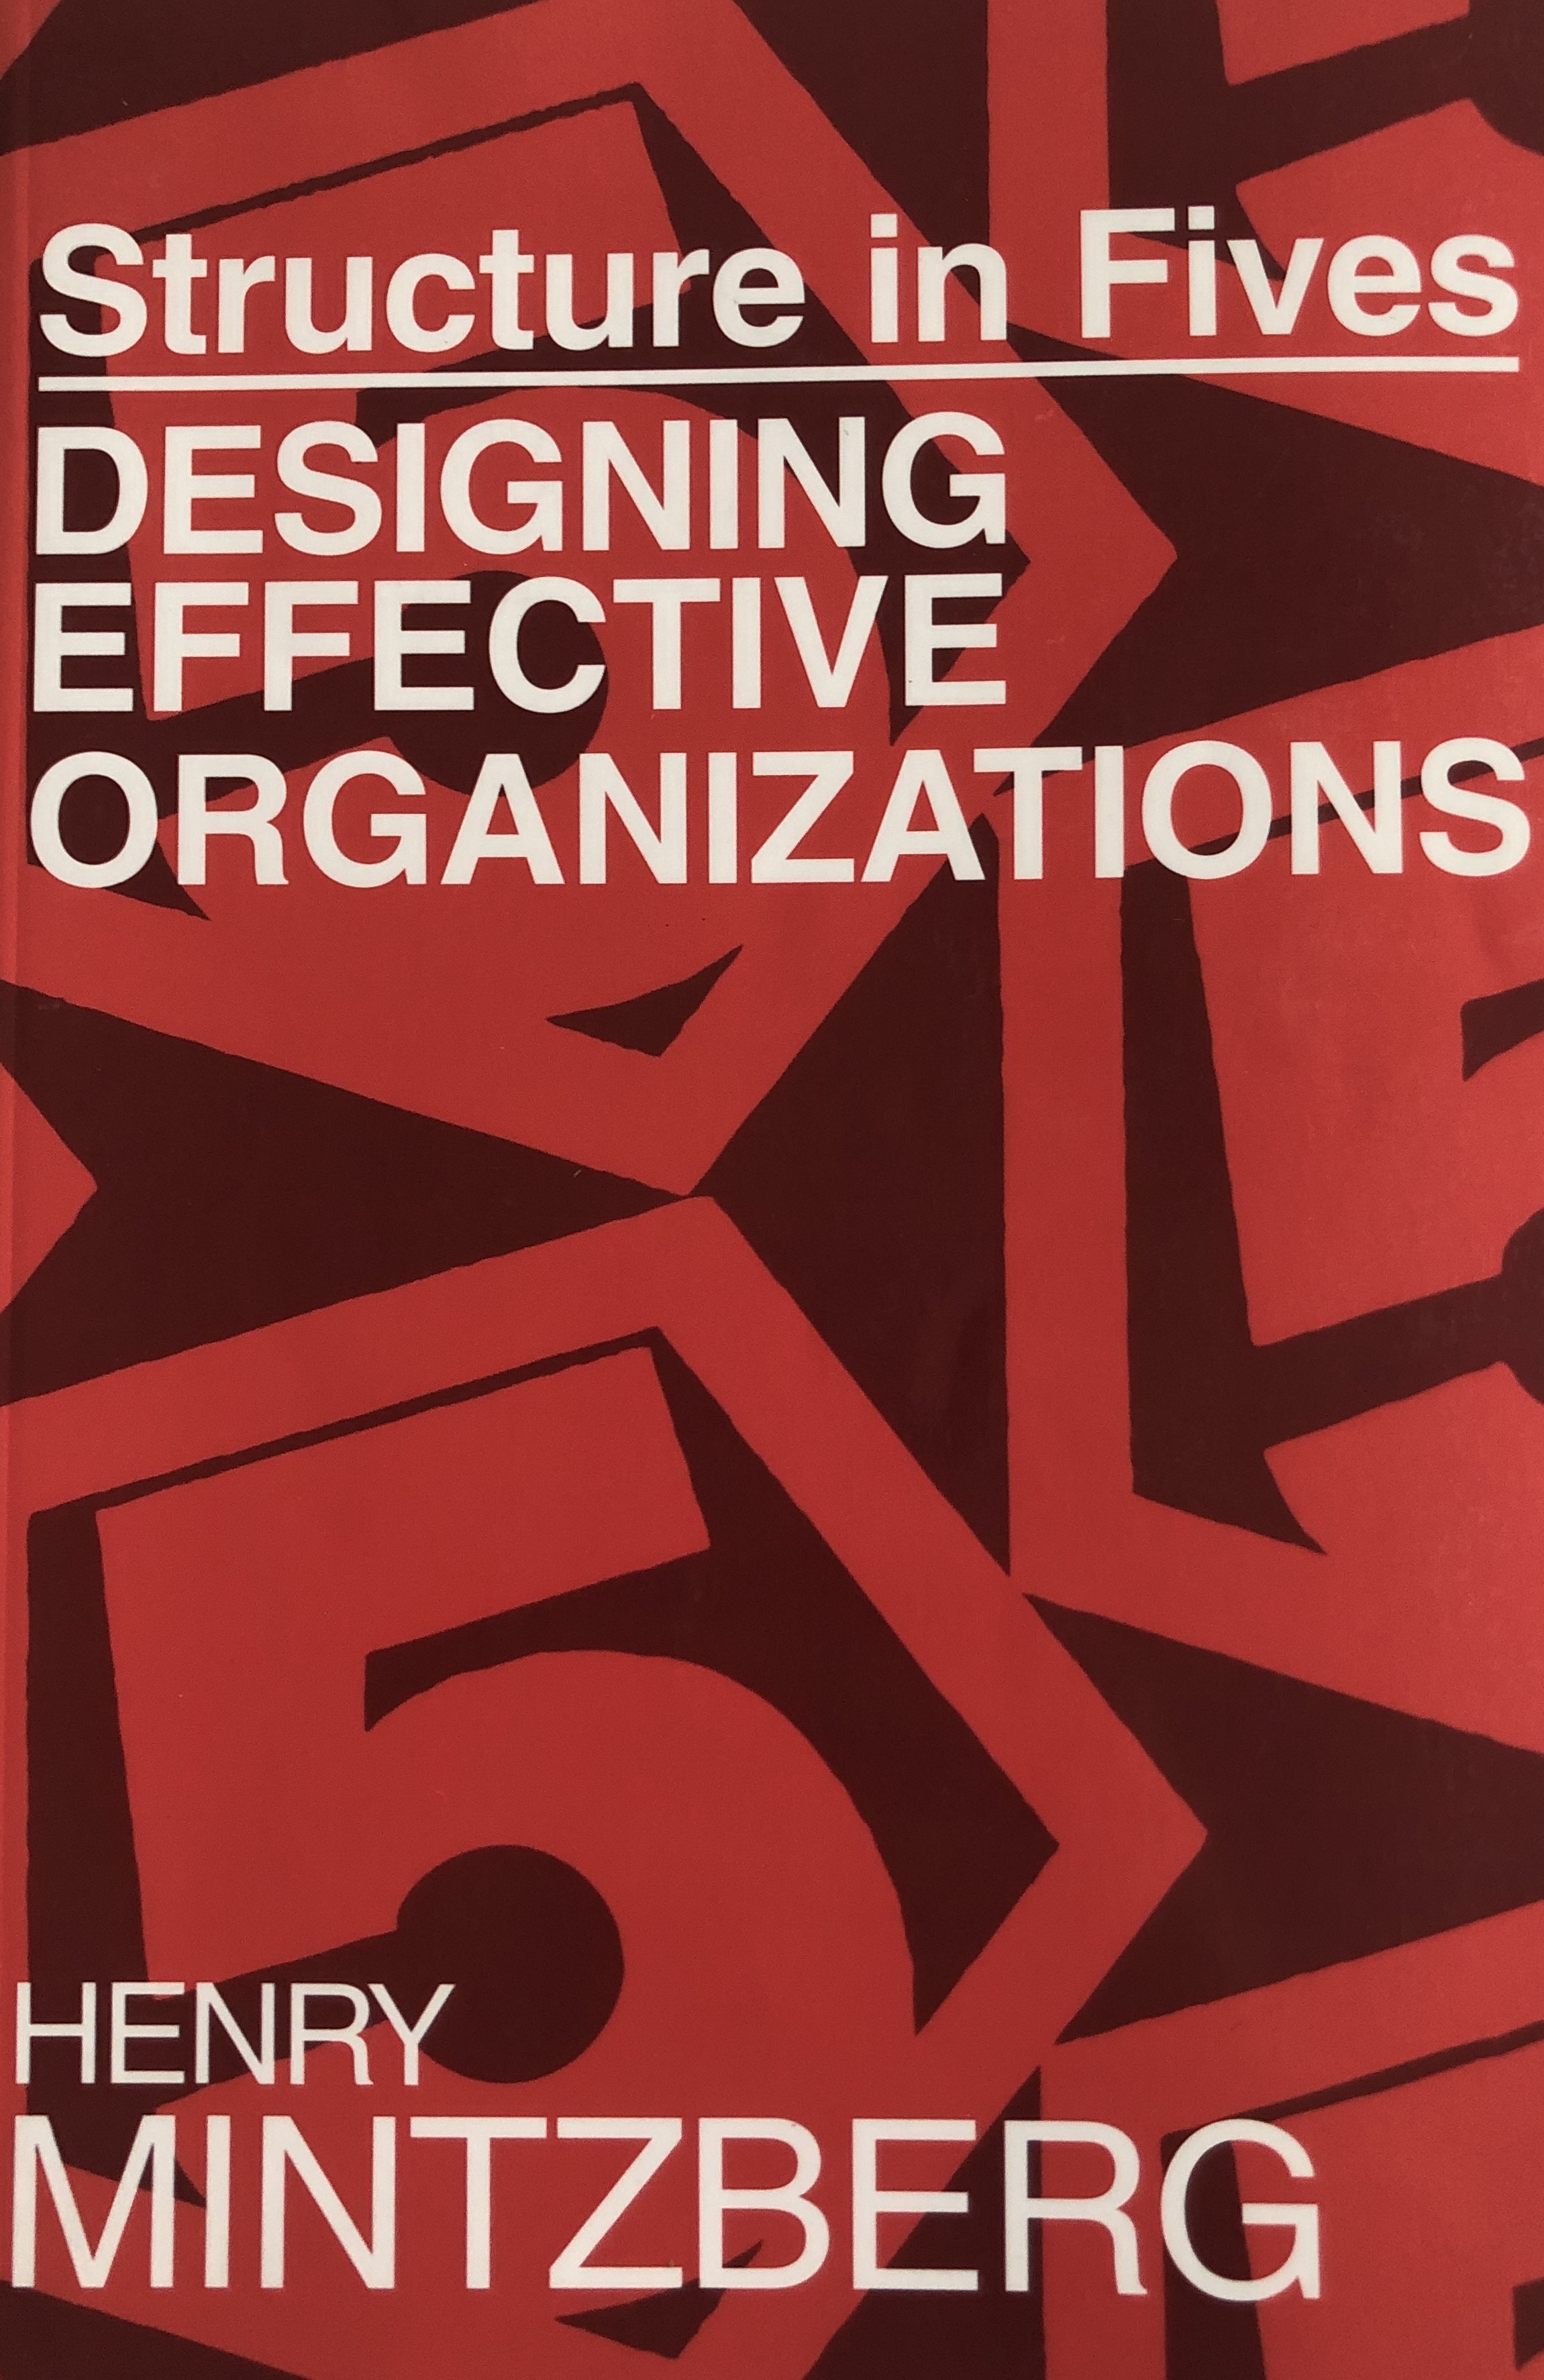 Structure in Fives: Designing Effective Organizations; Henry Mintzberg; 2009